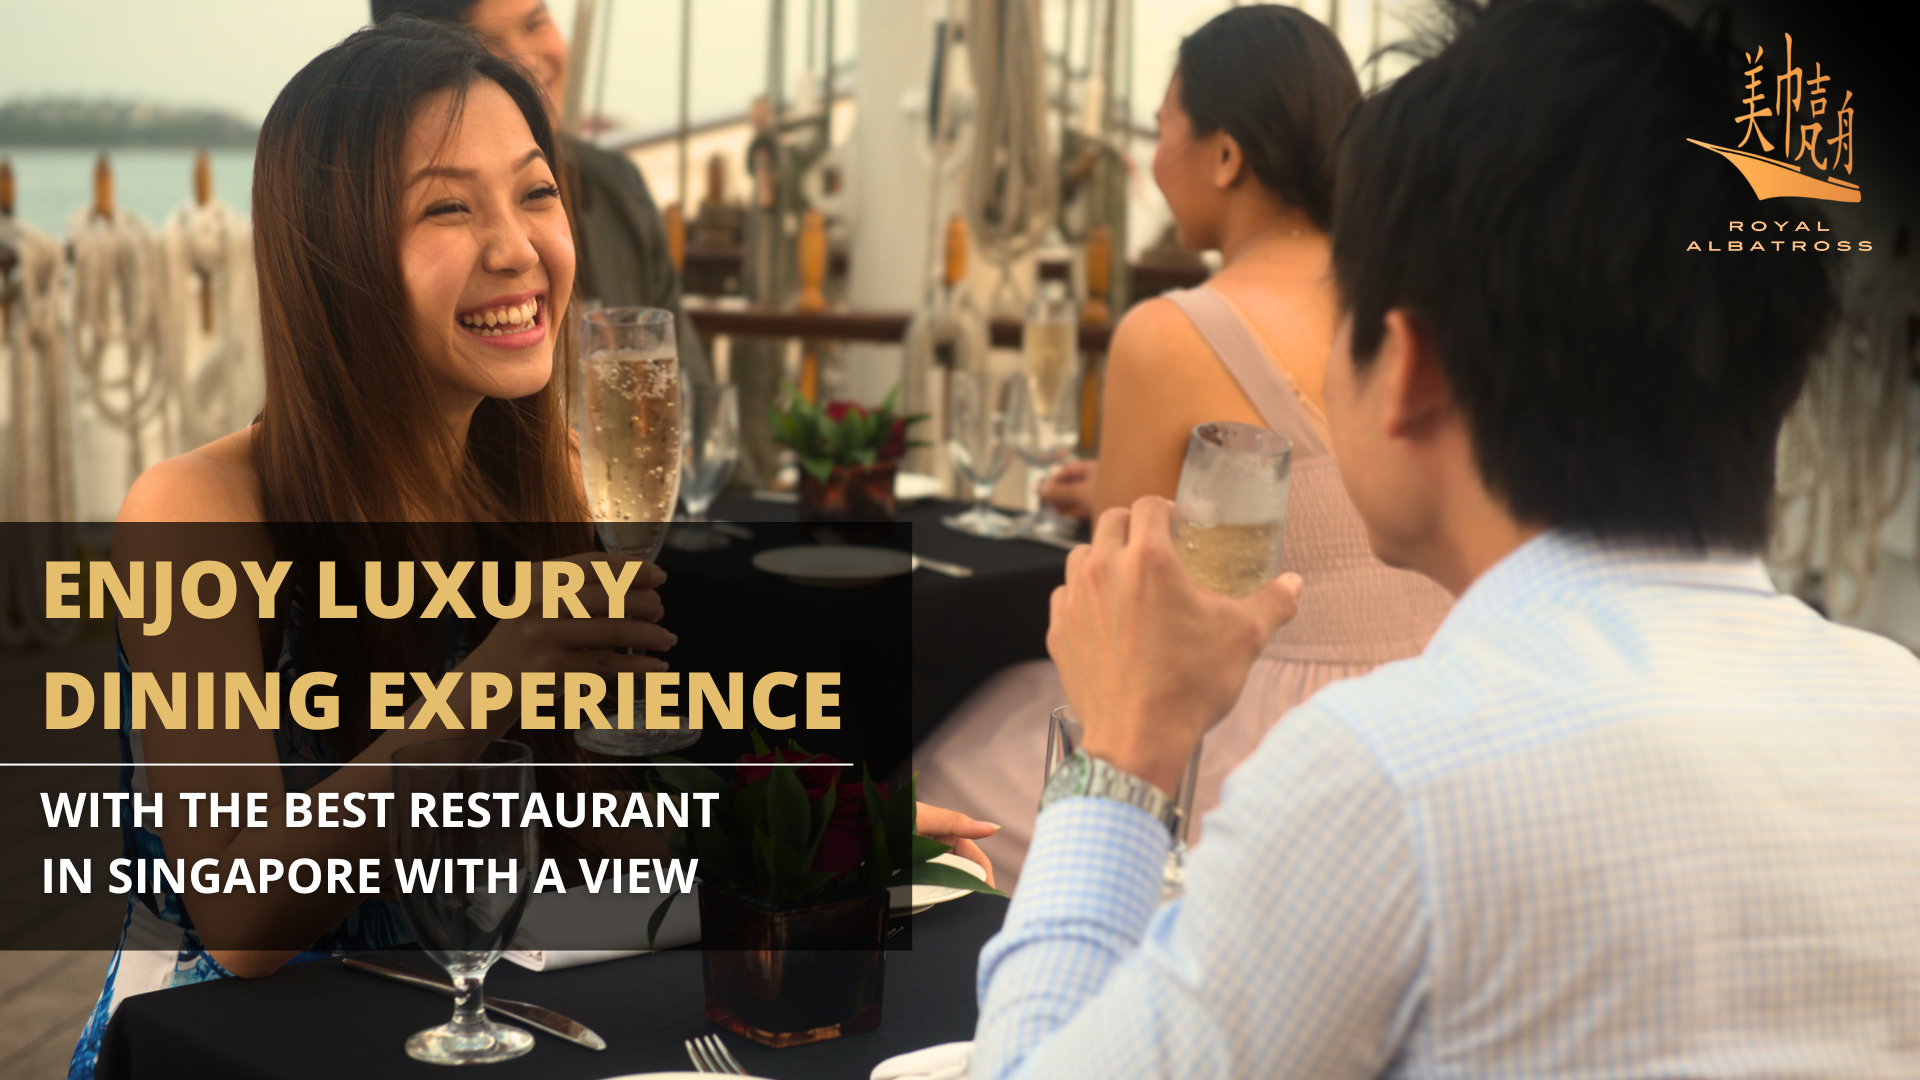 Enjoy Luxury Dining Experience with the Best Restaurant in Singapore With a View - Royal Albatross